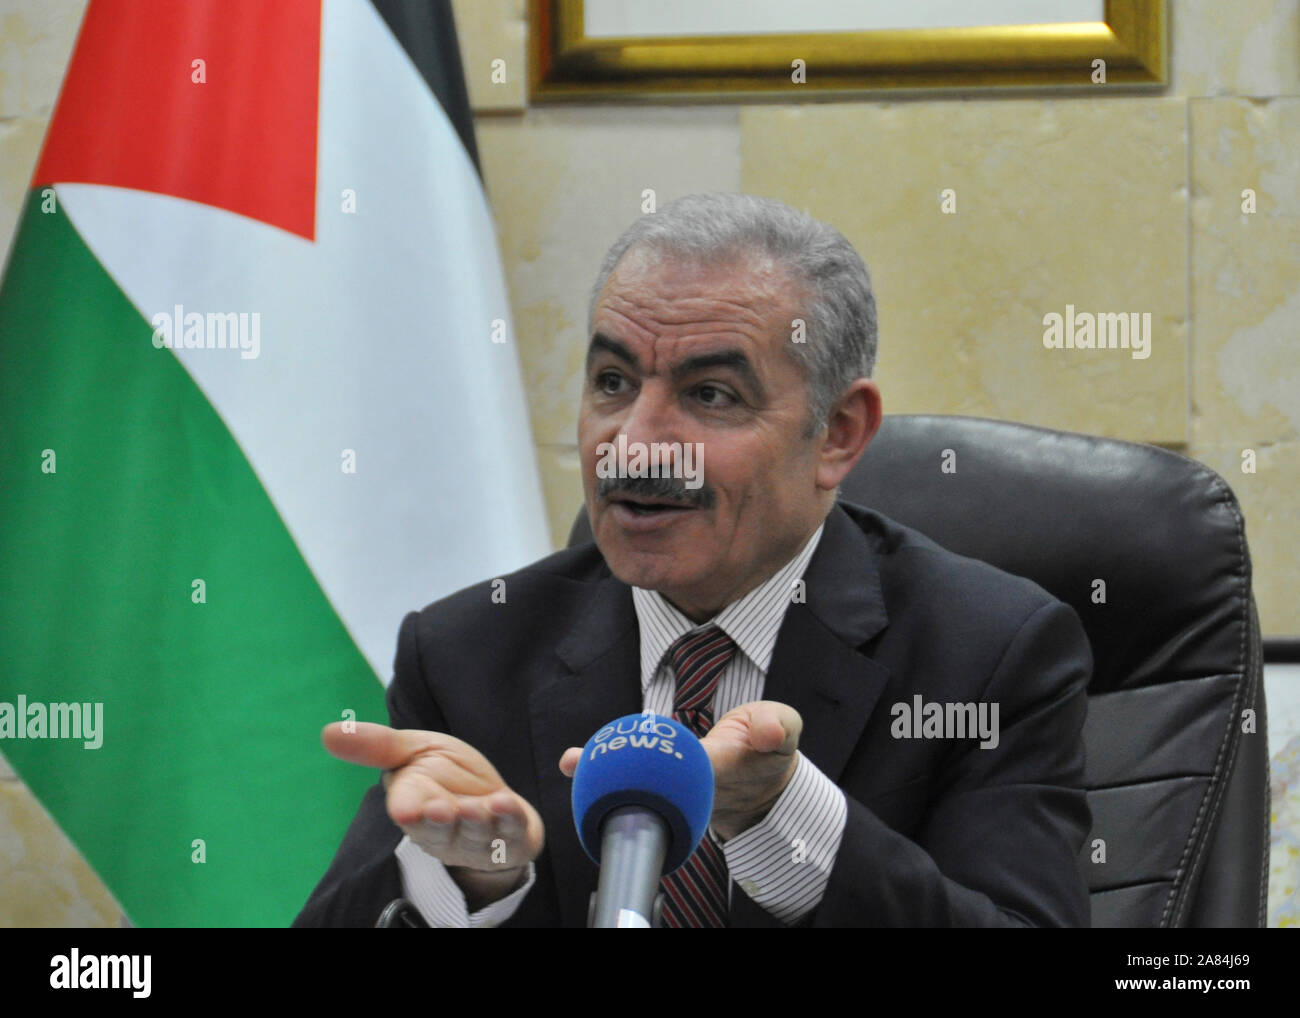 Ramallah, Palestinian Territory, Occupied. 29th Oct, 2019. Prime Minister of Palestine Mohammad Shtayyeh speaks with journalists during the press conference in Ramallah, Palestine, October 29, 2019. Credit: Eliska Naegele/CTK Photo/Alamy Live News Stock Photo